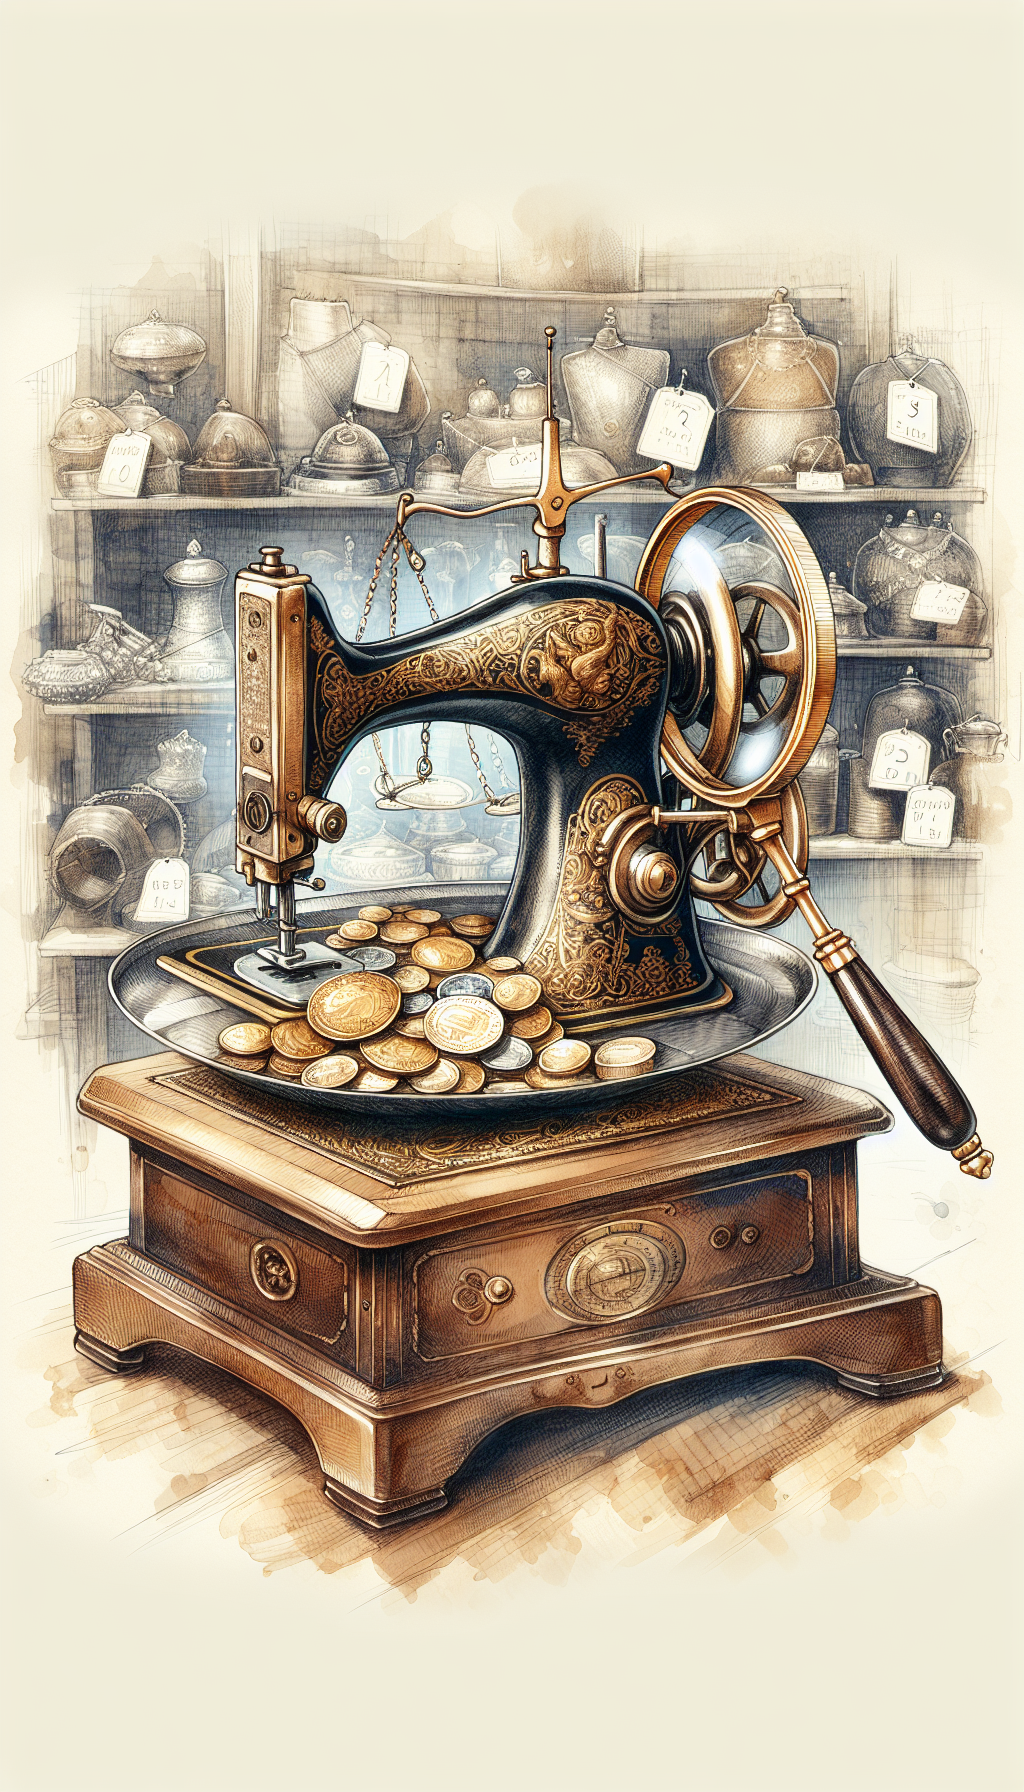 An illustration of a classic, ornate sewing machine standing atop an antique appraiser's jeweler scale, balancing with a pile of golden coins on the opposite tray. A magnifying glass focuses on the machine's intricate details, and a small, price-tagged vintage collection decorates the background. The style merges watercolor textures for the machine's patina with sharp, inked outlines emphasizing the machine and monetary elements.